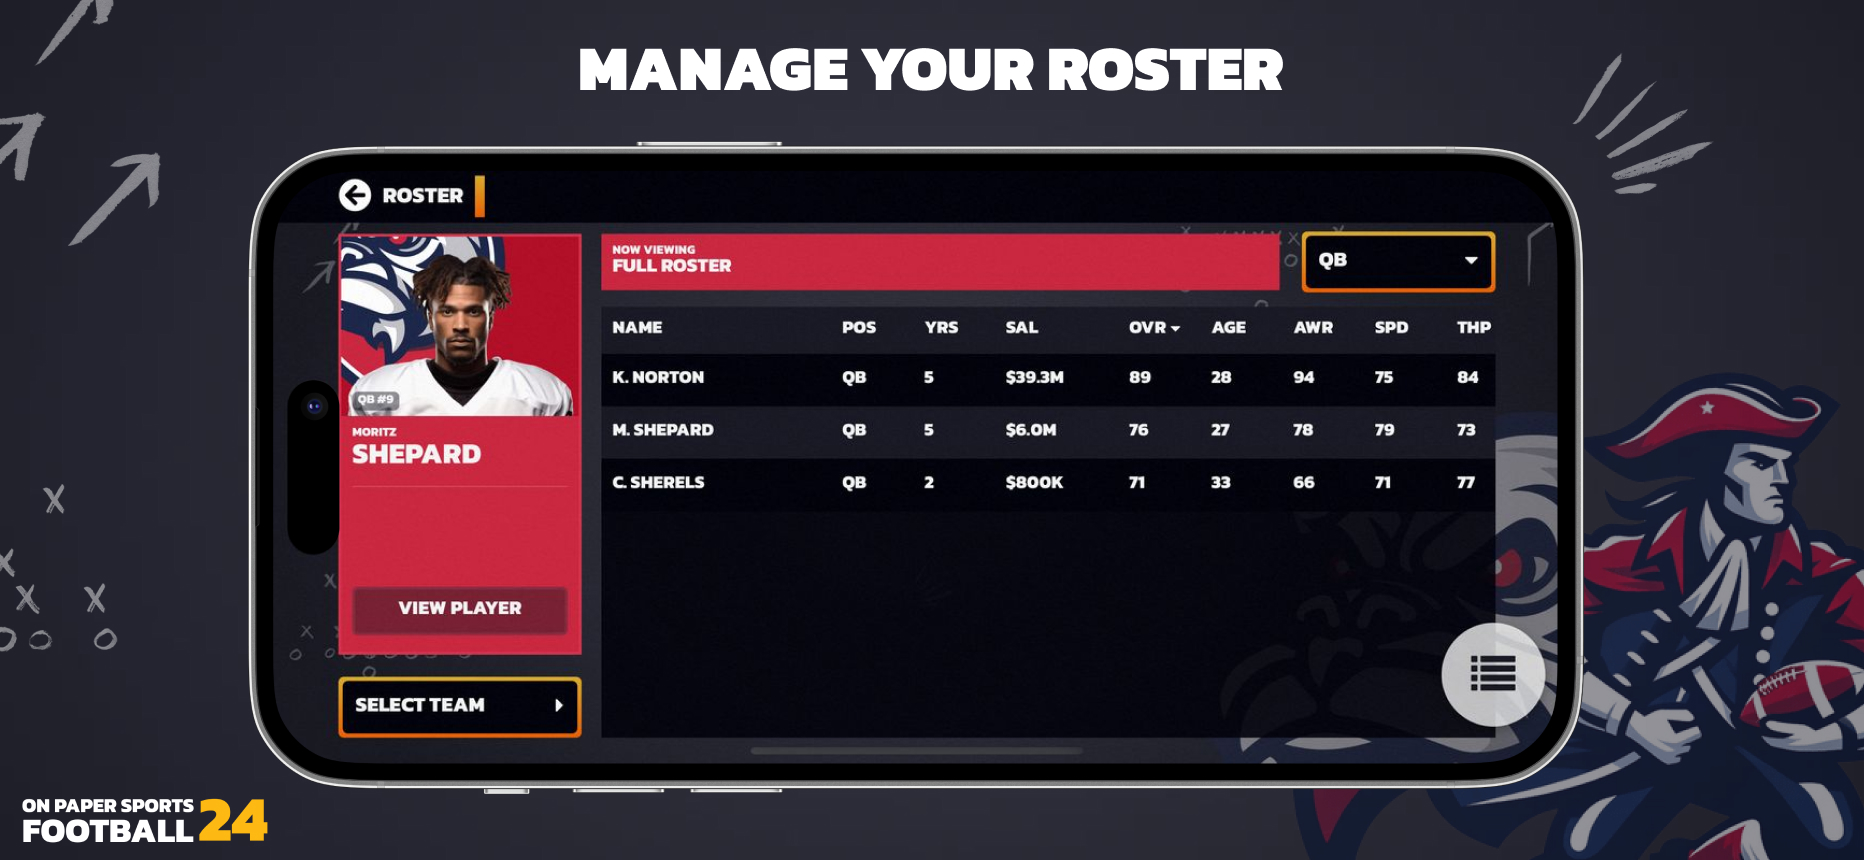 Manage your roster